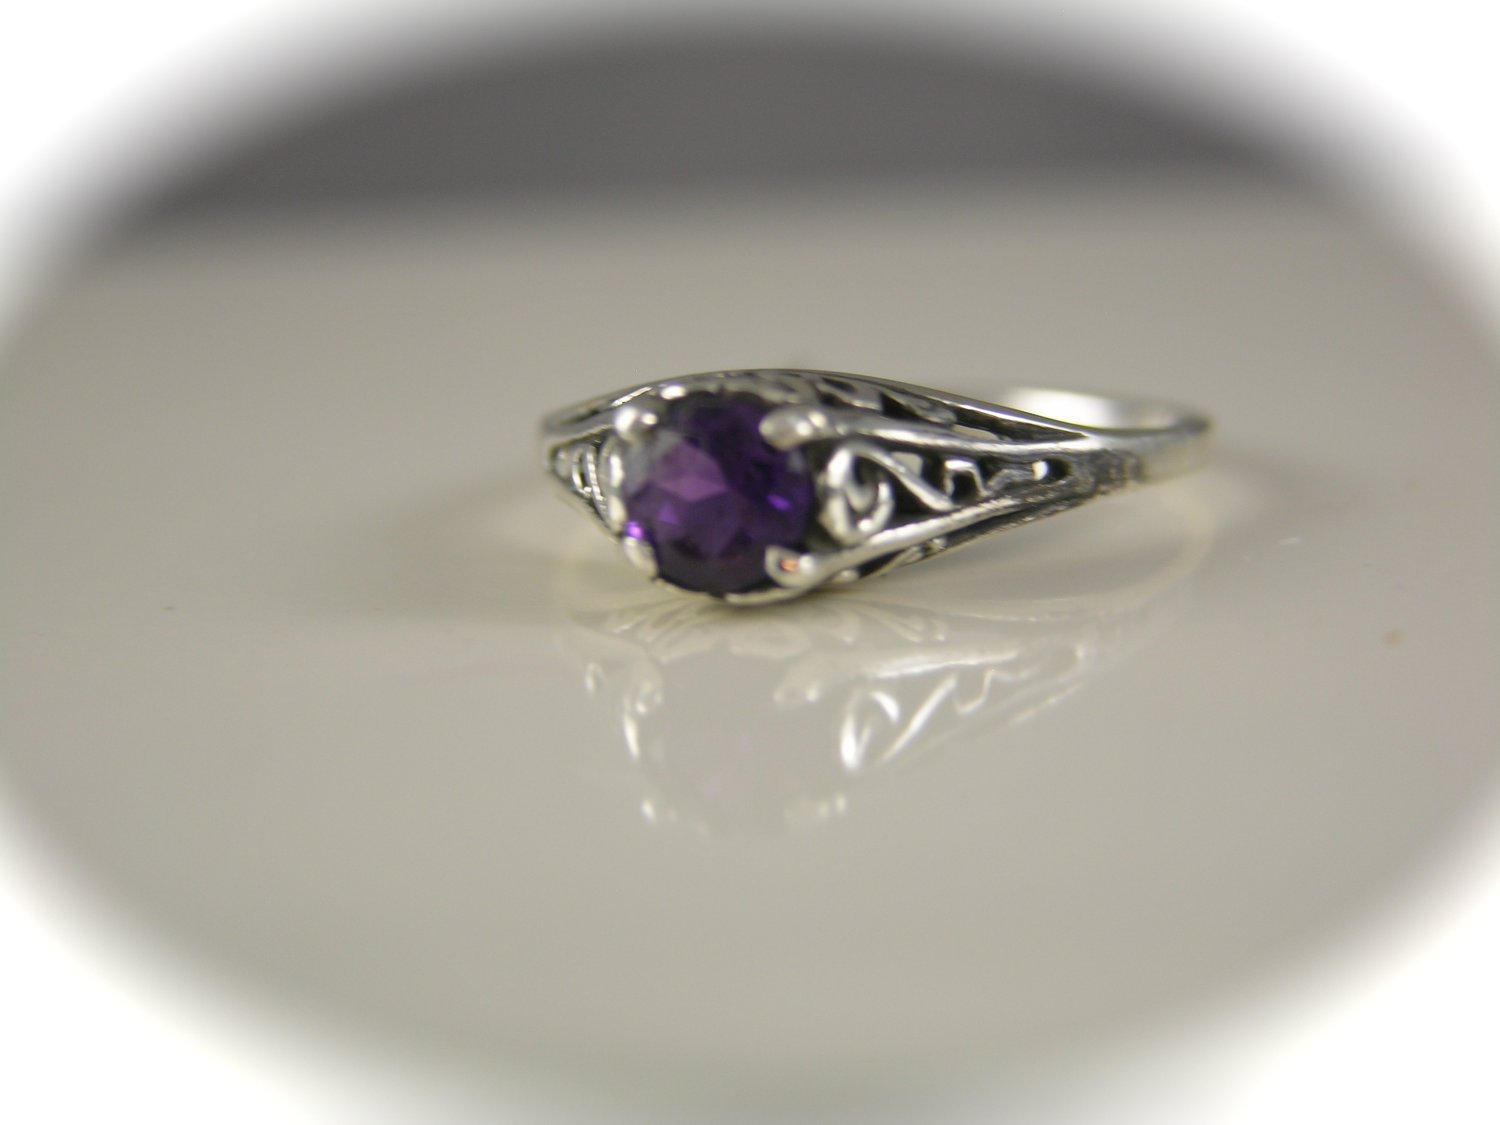 VICTORIAN 925 STERLING SILVER ANTIQUE STYLE LAB OPAL FILIGREE RING SIZE 6 #994 